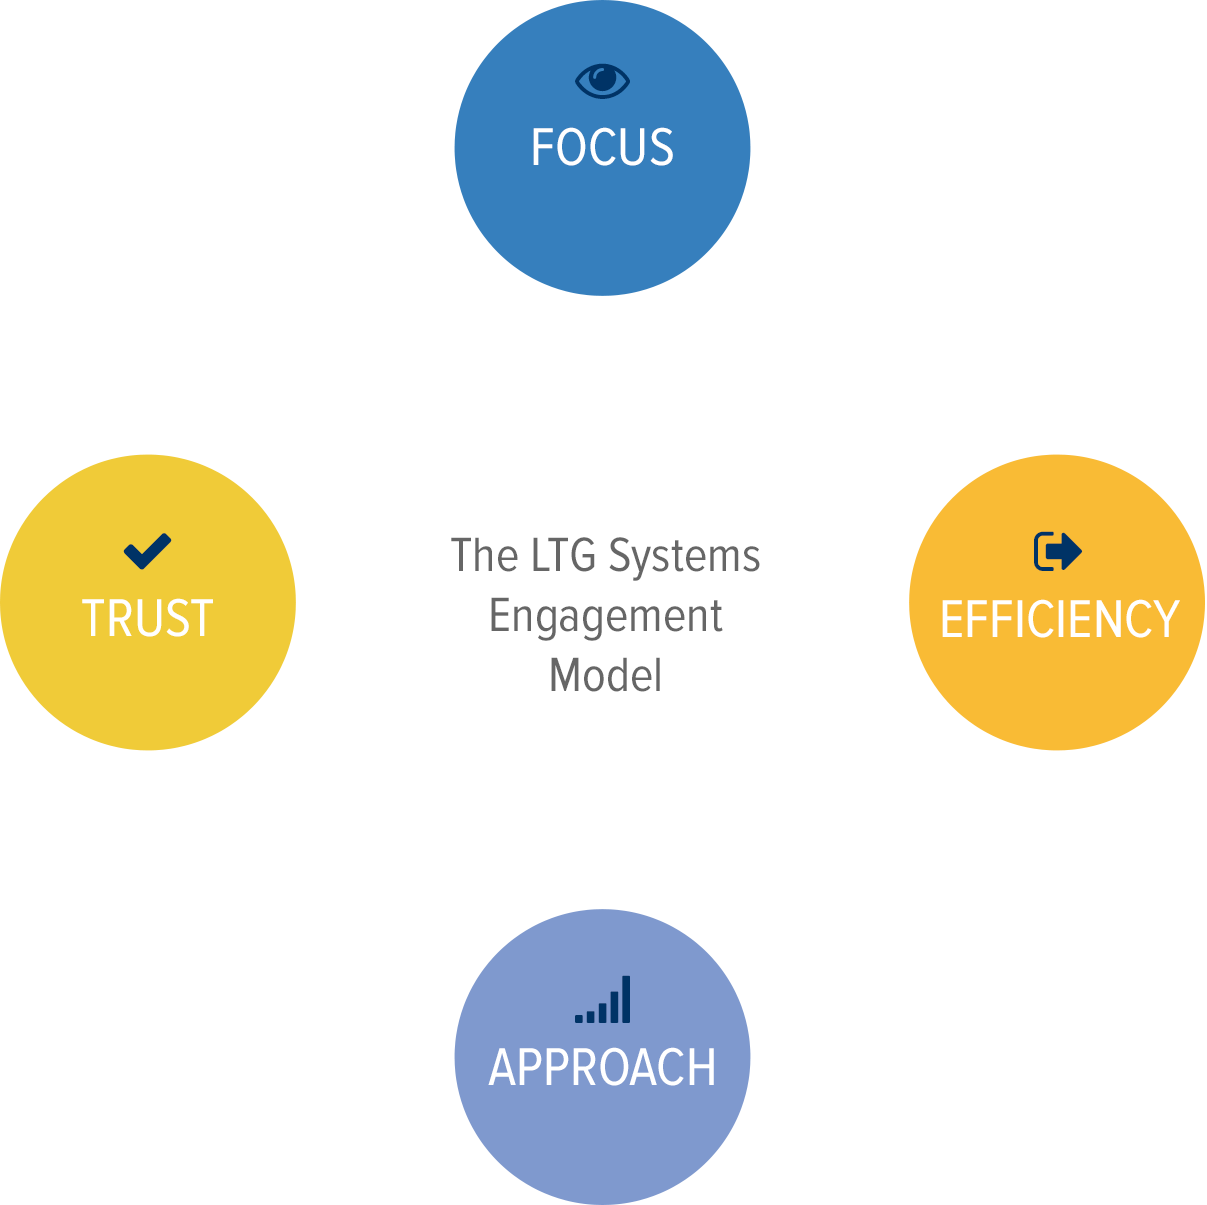 The LTG Systems Engagement Model